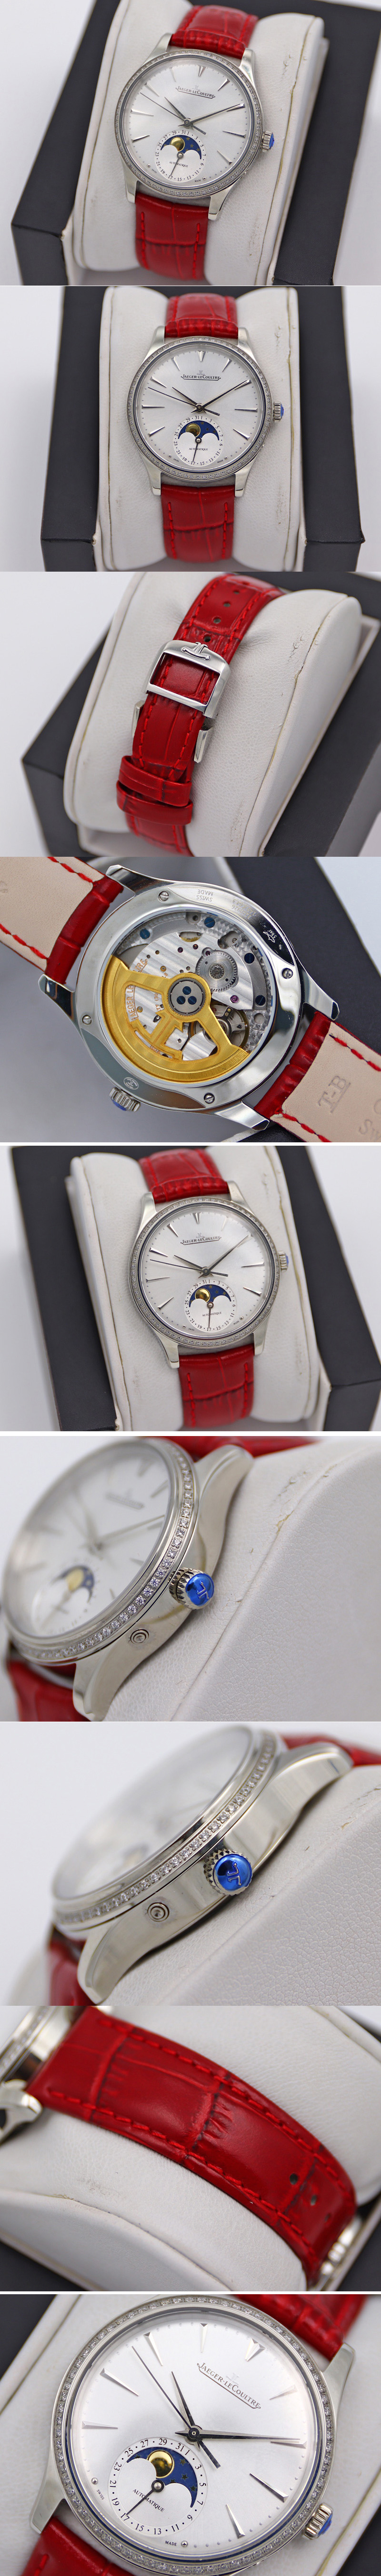 Replica Jaeger-LeCoultre Master Ultra Thin Moonphase SS/LE White Dial Diamond Bezel Red Leather Strap TW MY9015 to Cal.925